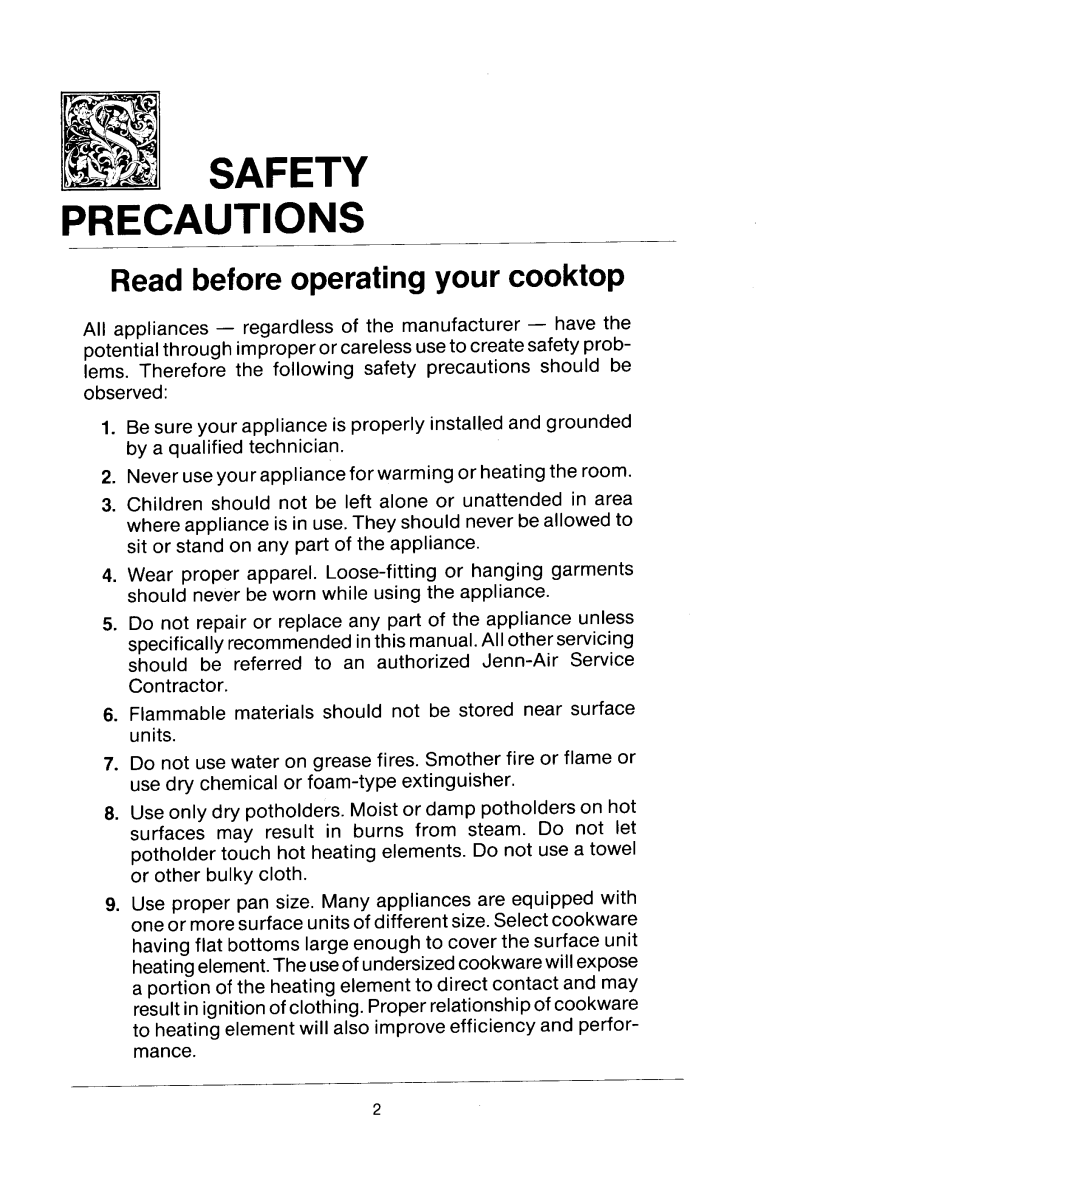 Jenn-Air CCS446 manual Safety Precautions, Read before operating your cooktop 